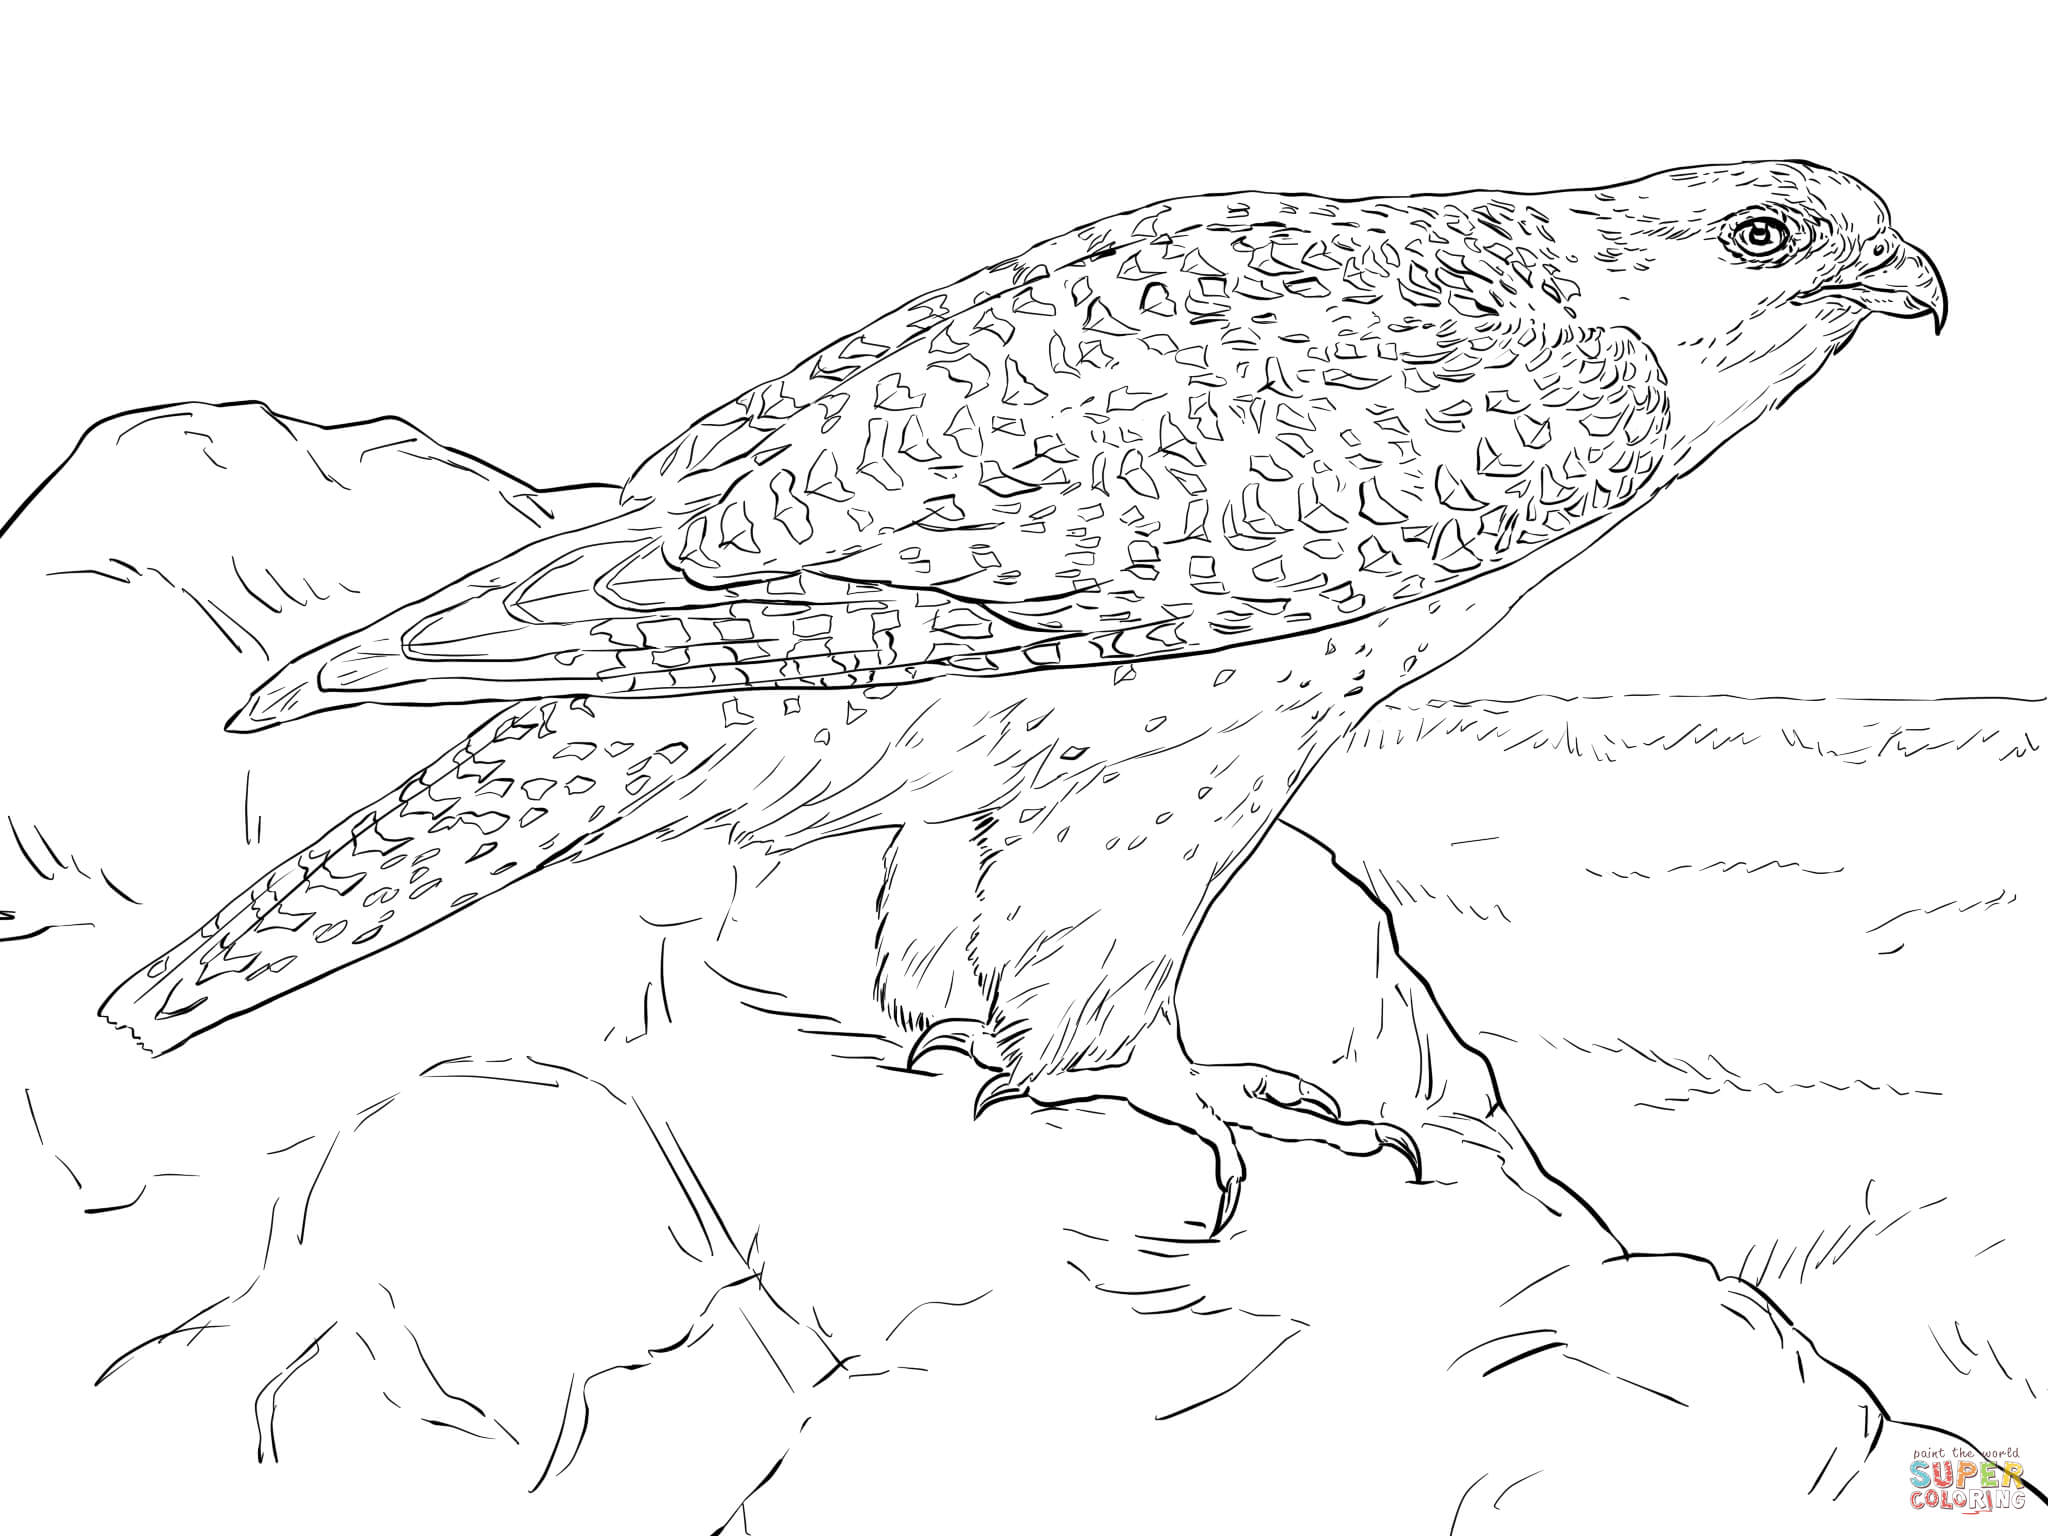 Gyrfalcon coloring #18, Download drawings